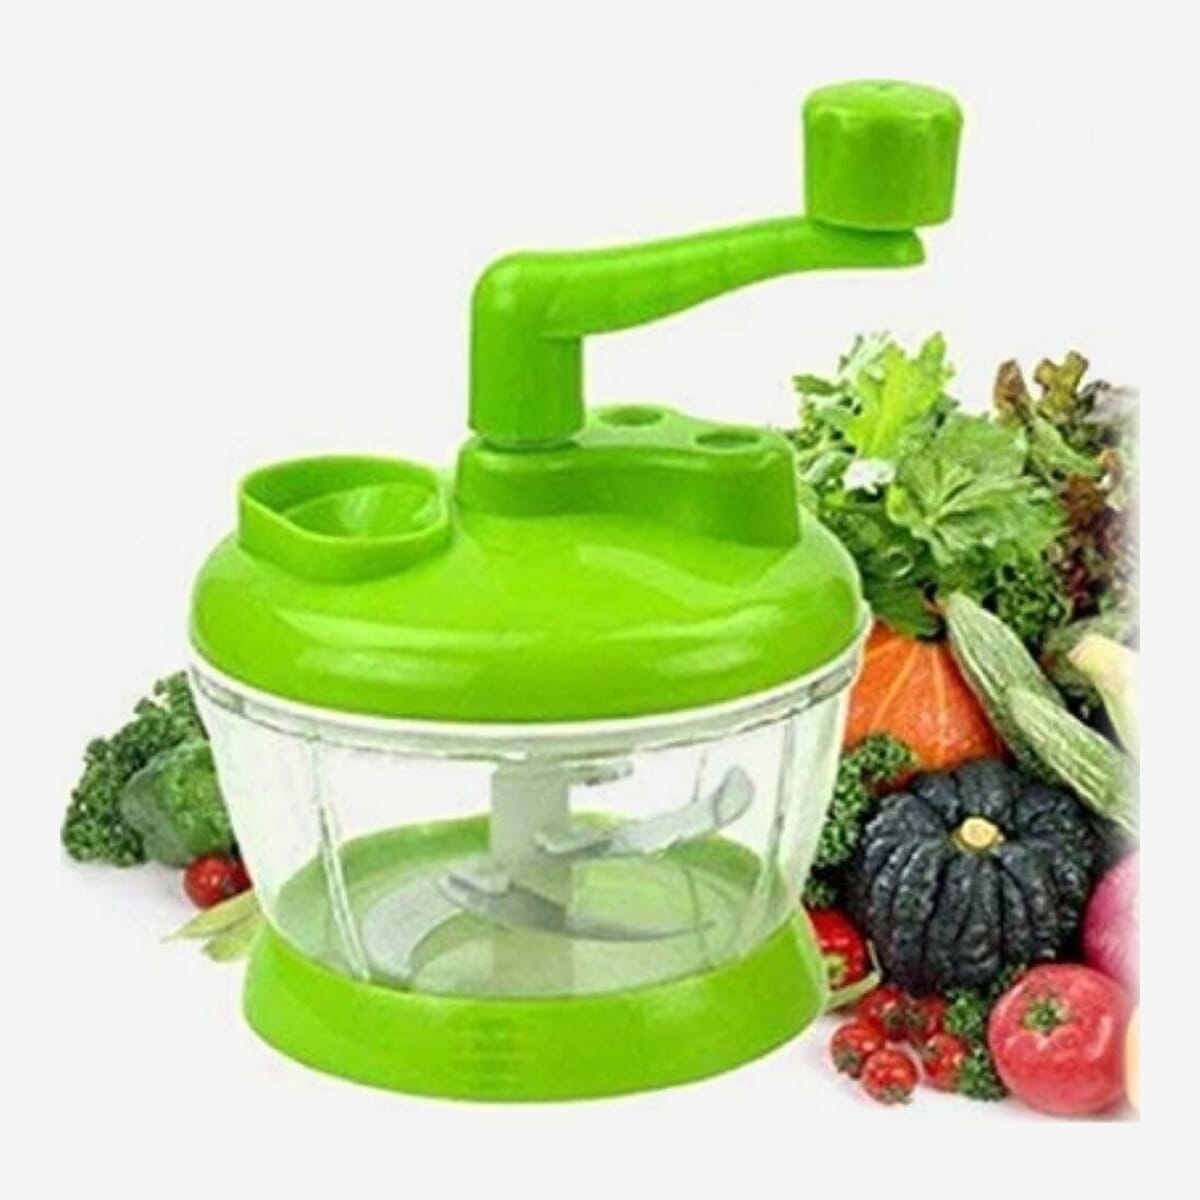 Manual Crank Chop Food Processor With Japanese Blades, Online Shopping in  Nepal, Shop Online, Delivery all over Nepal